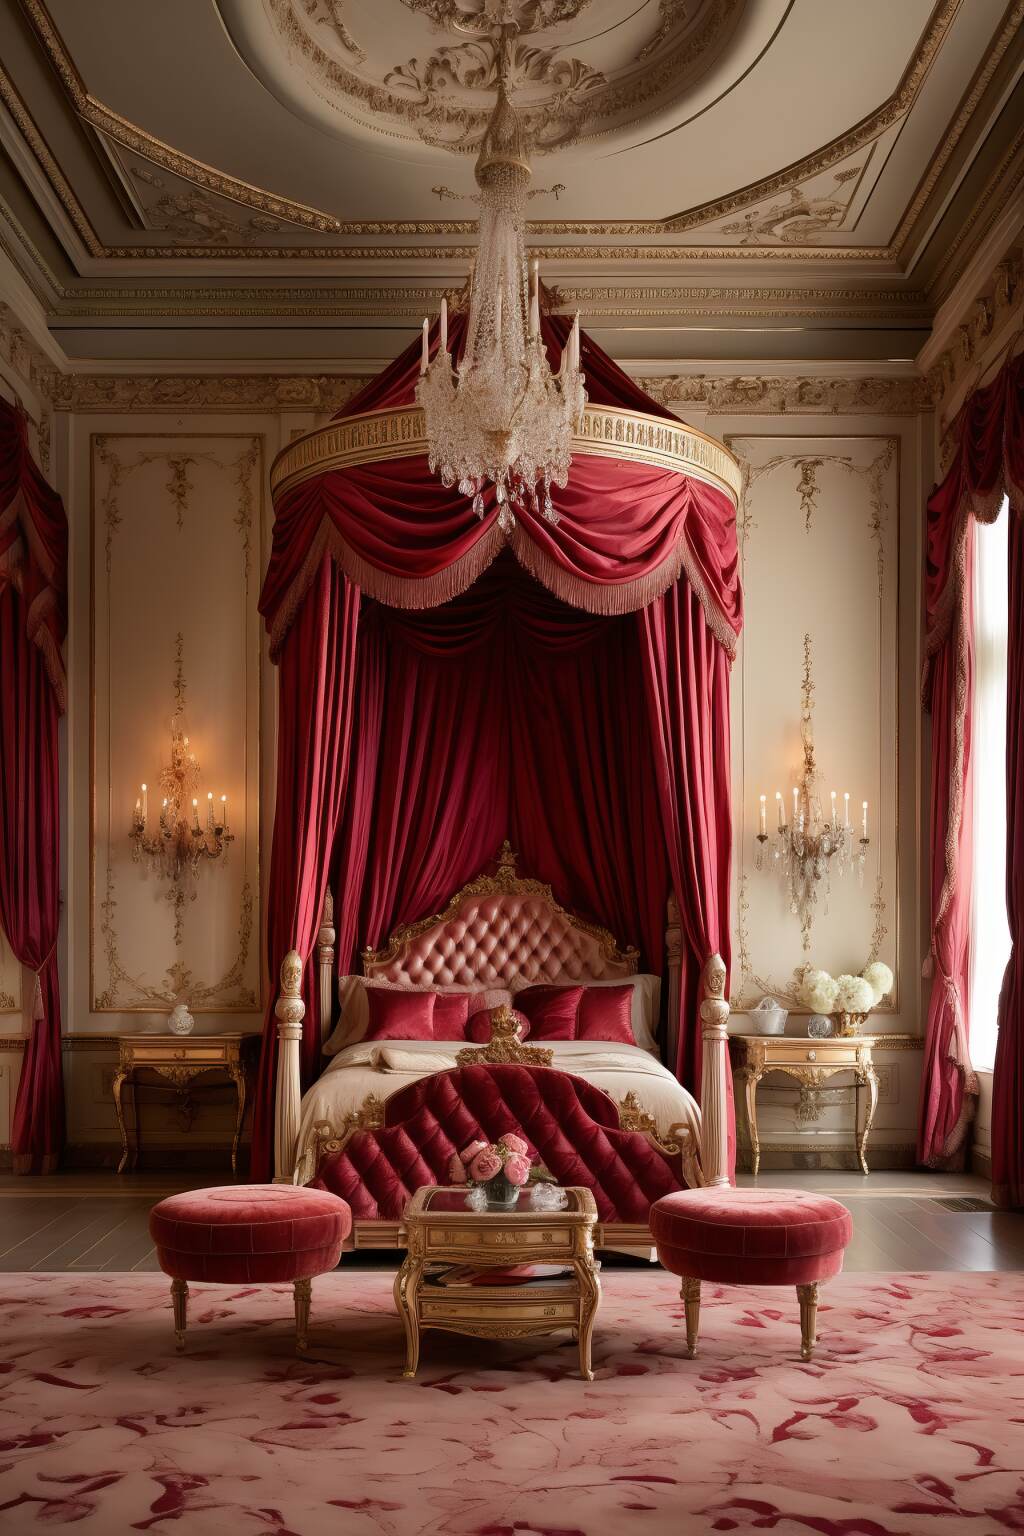 Lavish Bedroom With A Crimson Red Canopy Bed